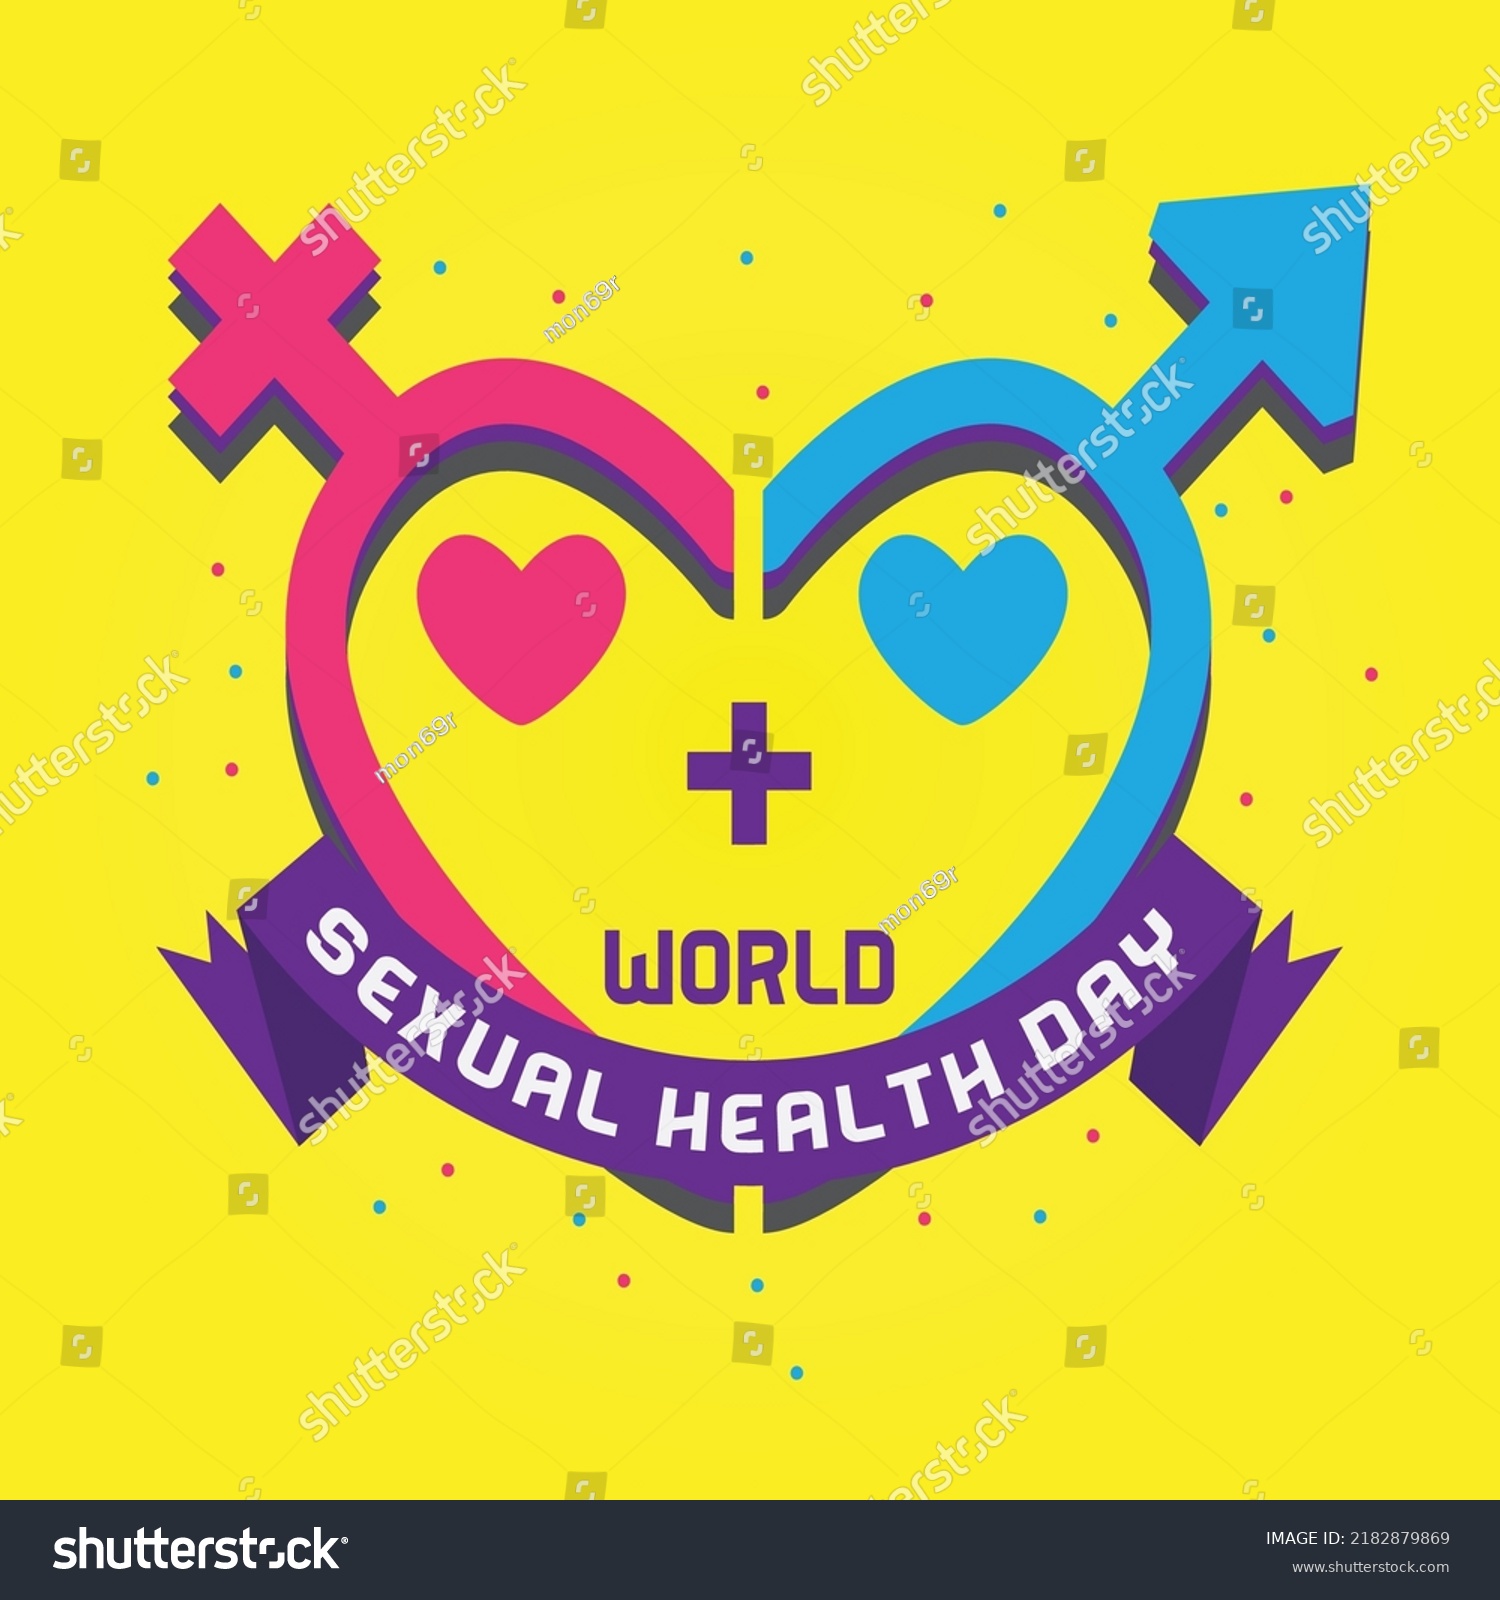 World Sexual Health Day Poster Stock Vector Royalty Free 2182879869 Shutterstock 